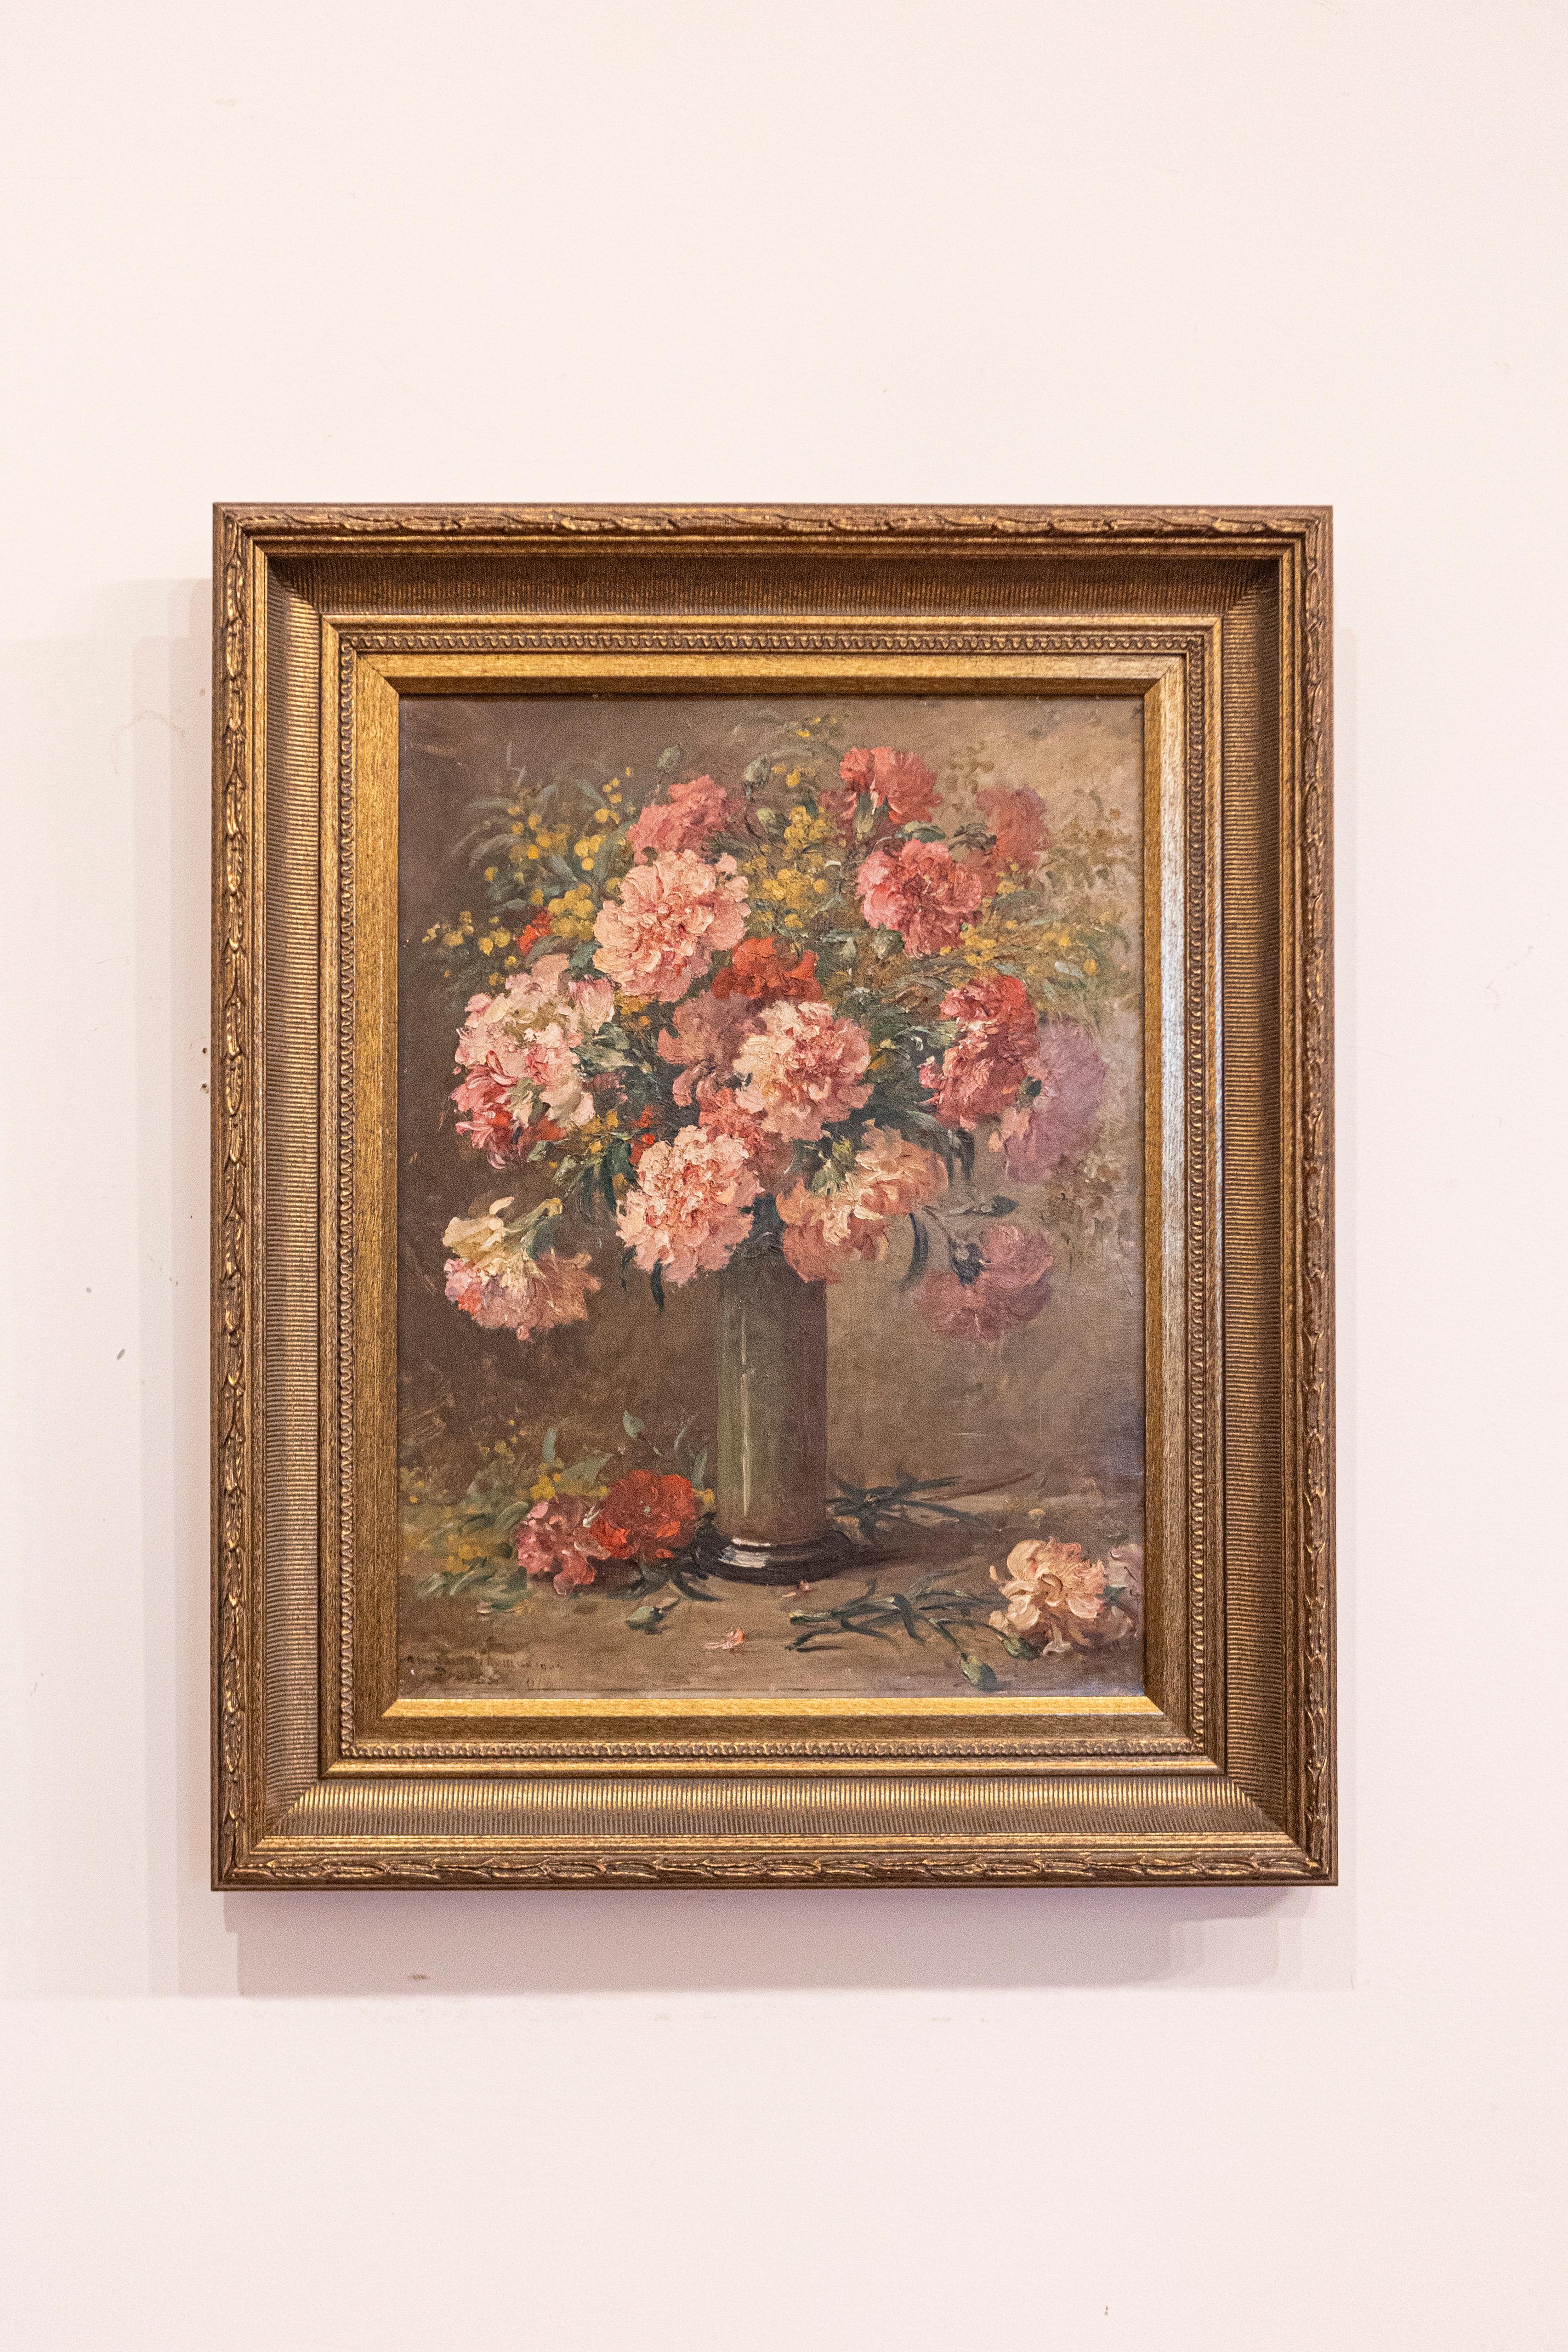 A French floral still-life oil on canvas painting from the 19th century, set inside a giltwood frame. This French still-life painting features an exquisite bouquet of pink flowers displayed in an elegant tall vase. The various shades of pink that